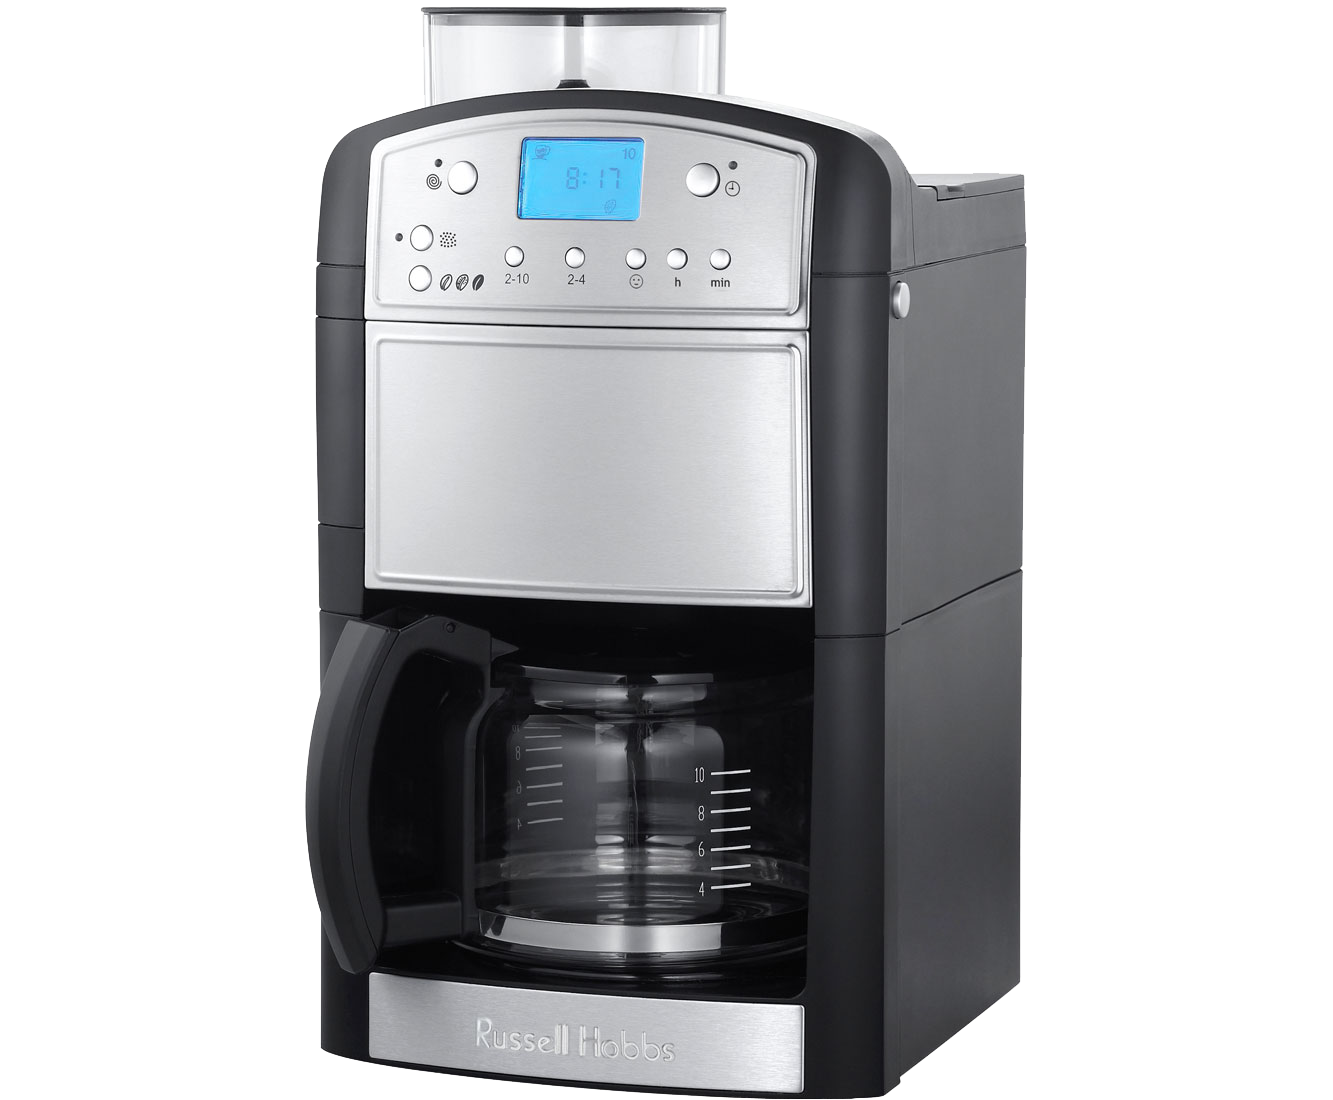 https://www.hughes.co.uk/blog/wp-content/uploads/2016/02/14899_BS_COFFEEMACHINE_02_L.png